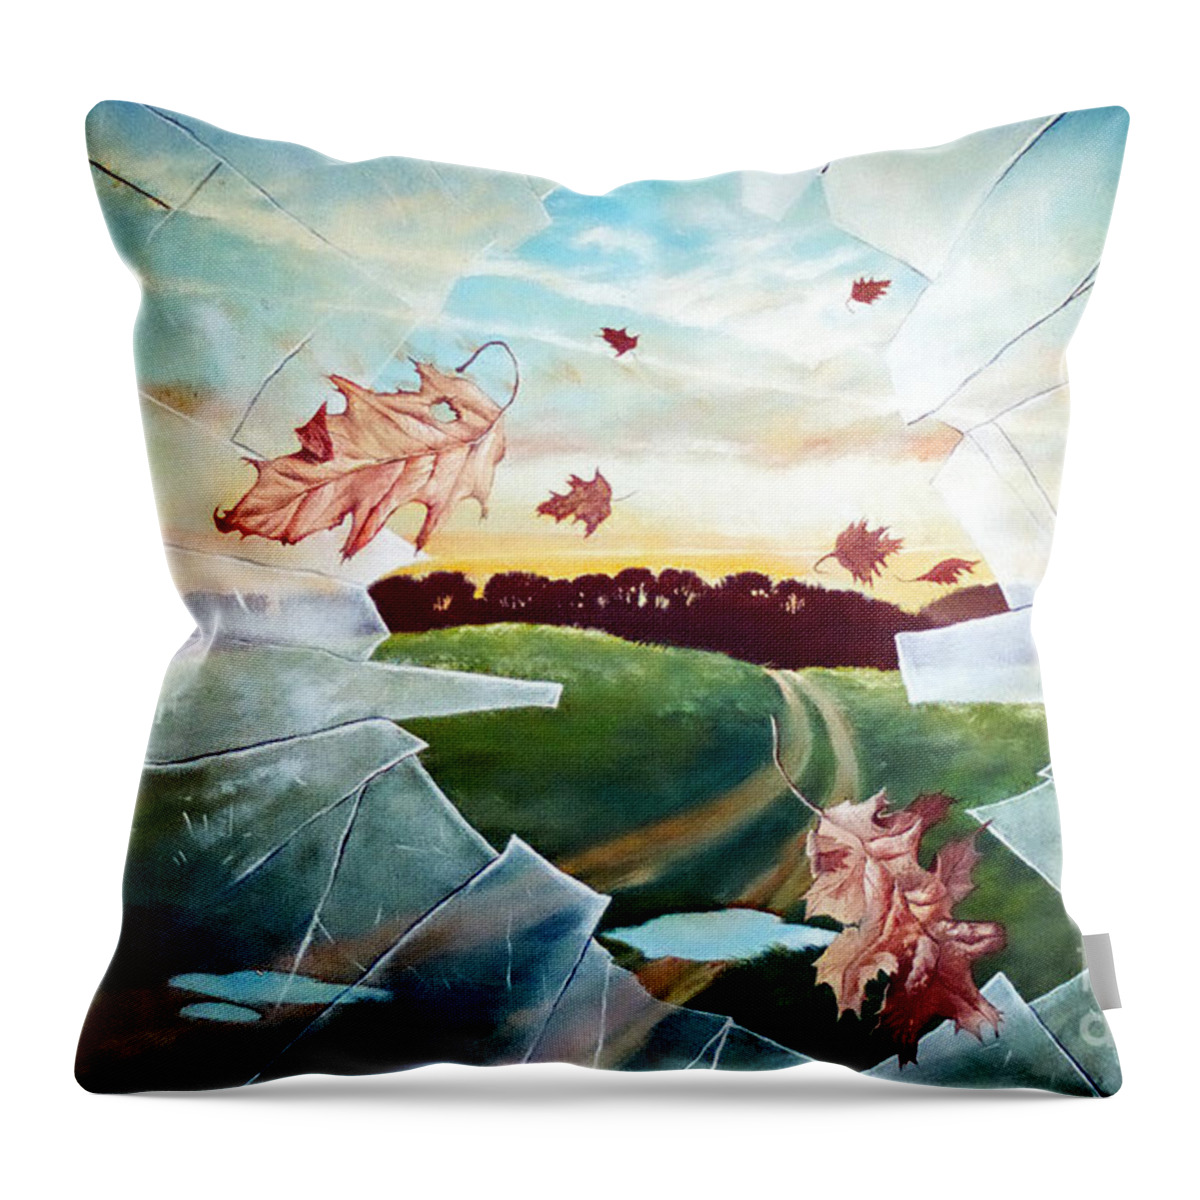 Window Throw Pillow featuring the painting Broken Pane by Christopher Shellhammer